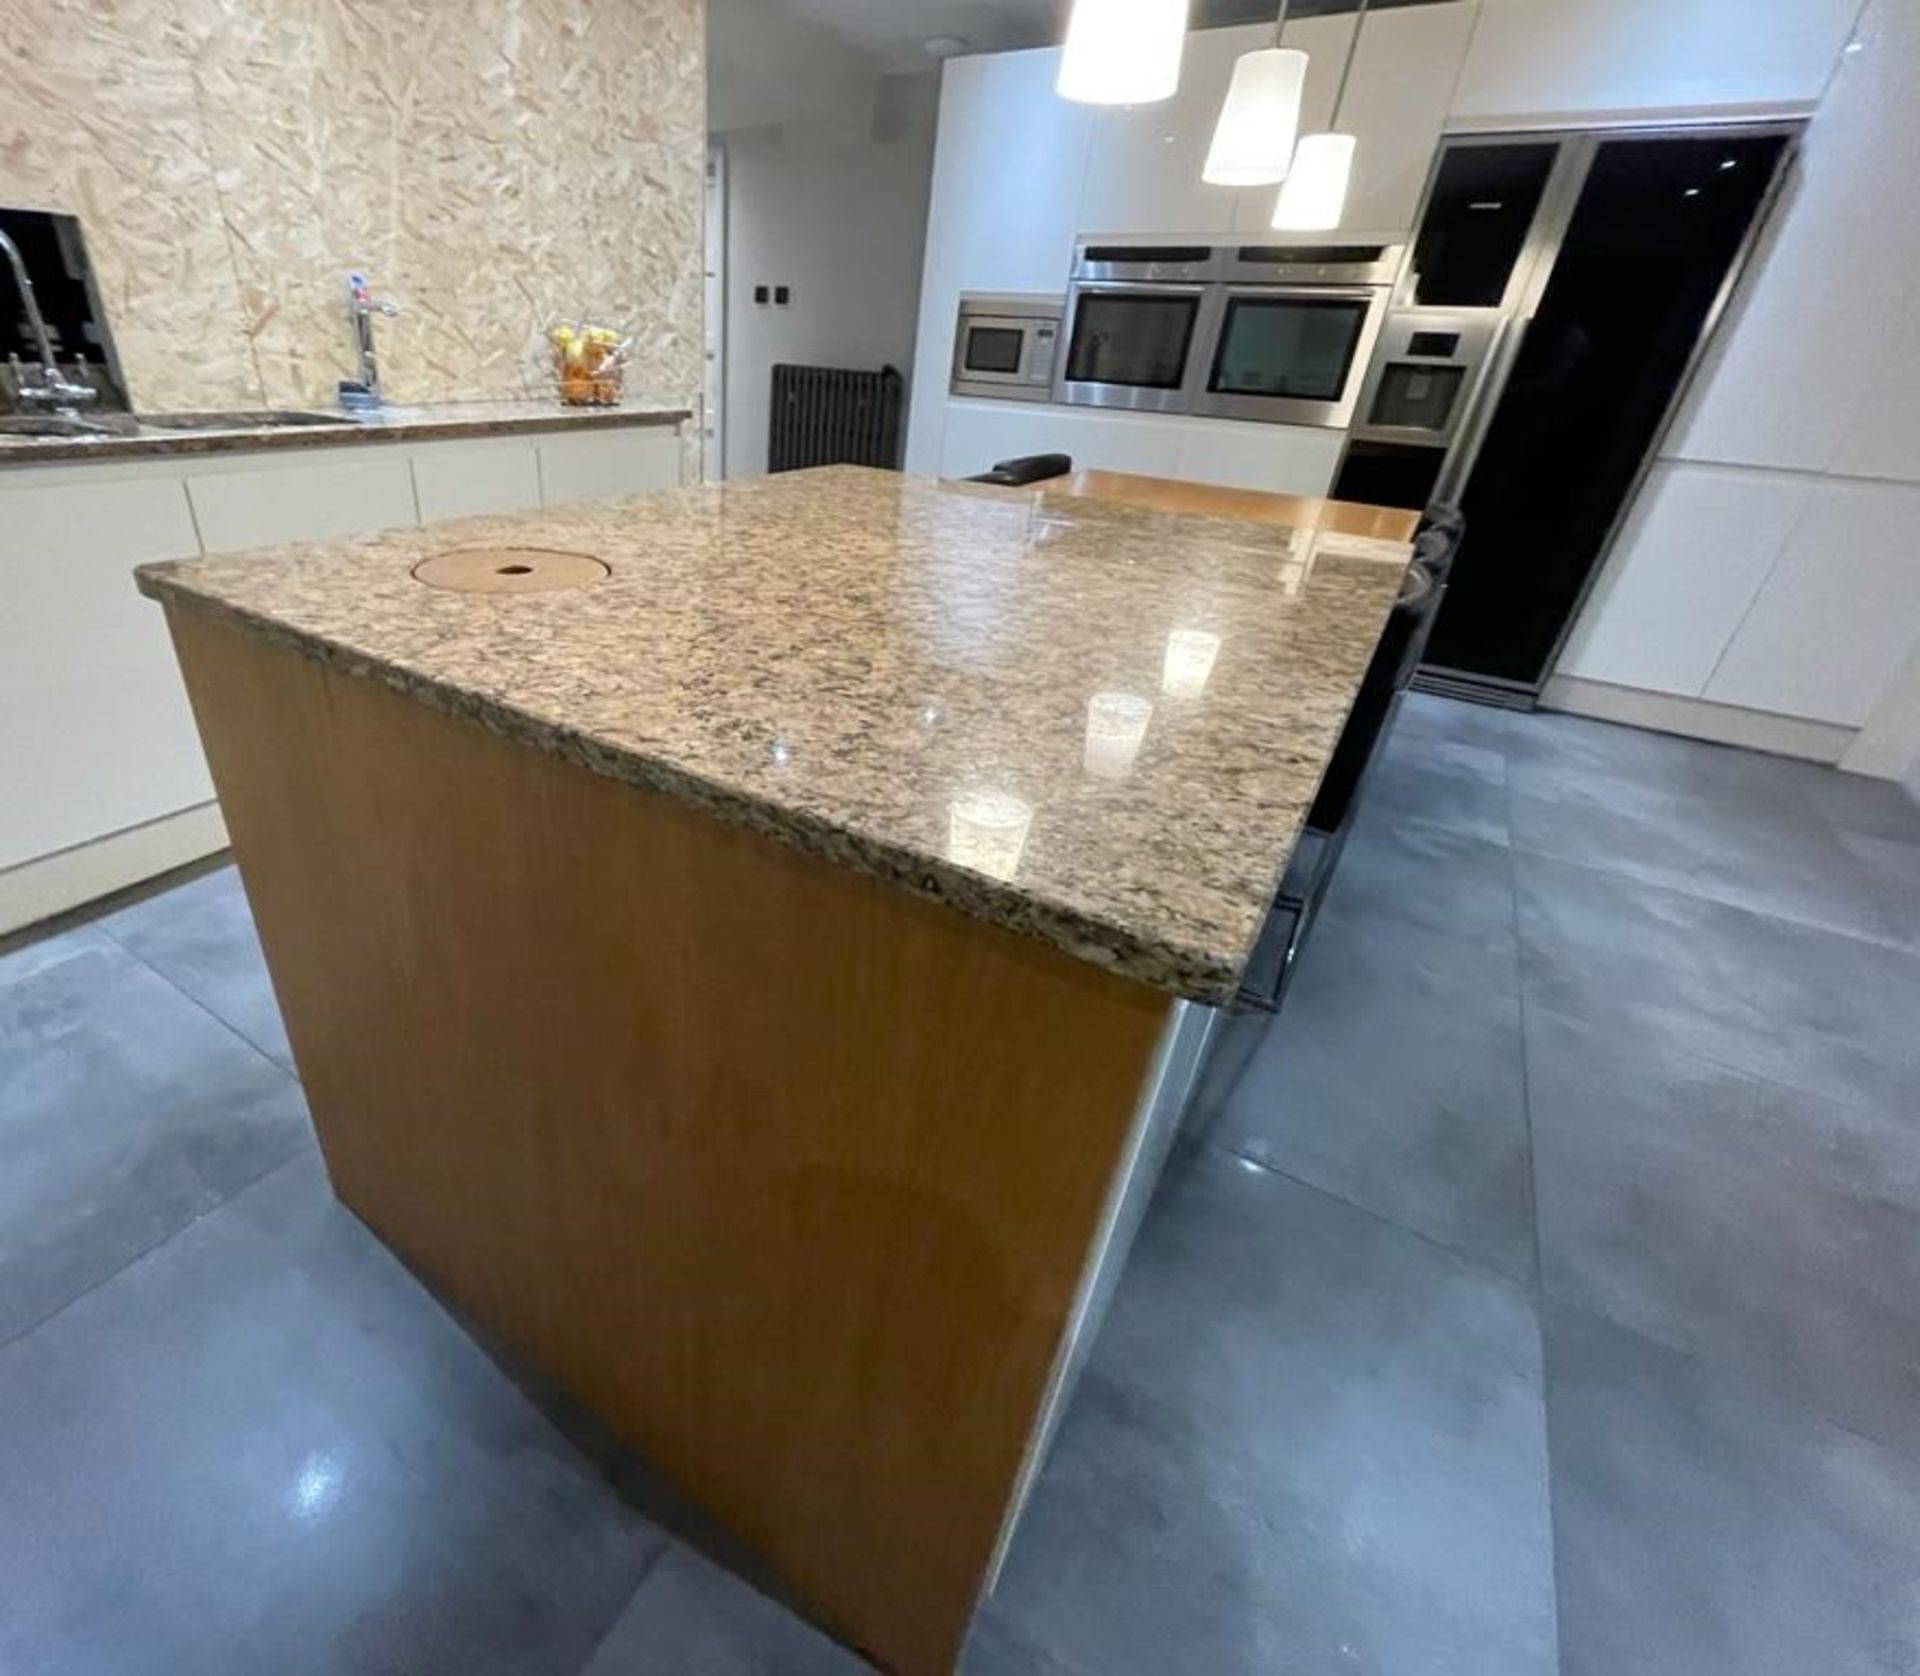 1 x Stunning PARAPAN Handleless Fitted Kitchen with Neff Appliances, Granite Worktops & Island - Image 25 of 126